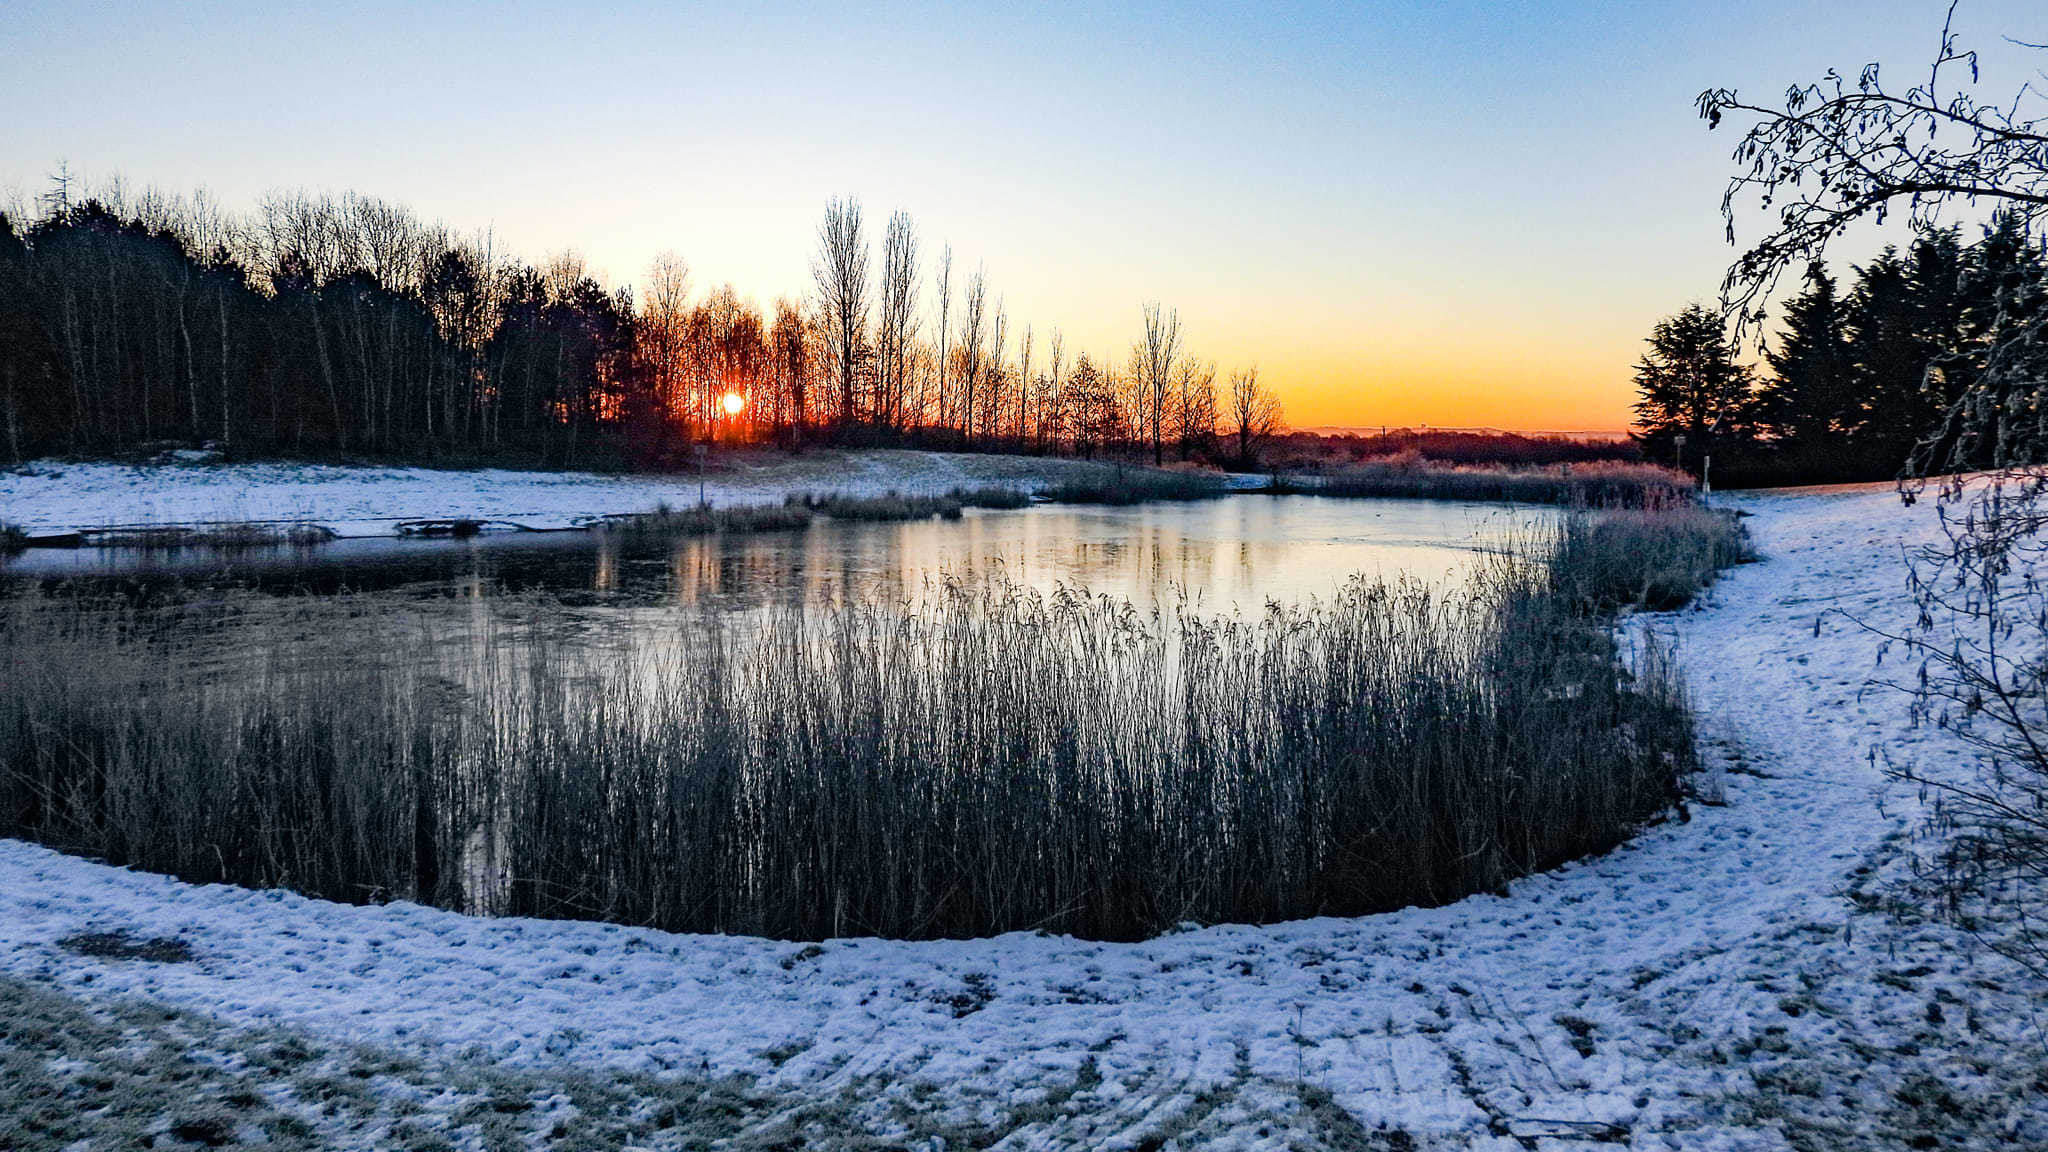 Clock Face Country Park at sunrise by Chris Shaw